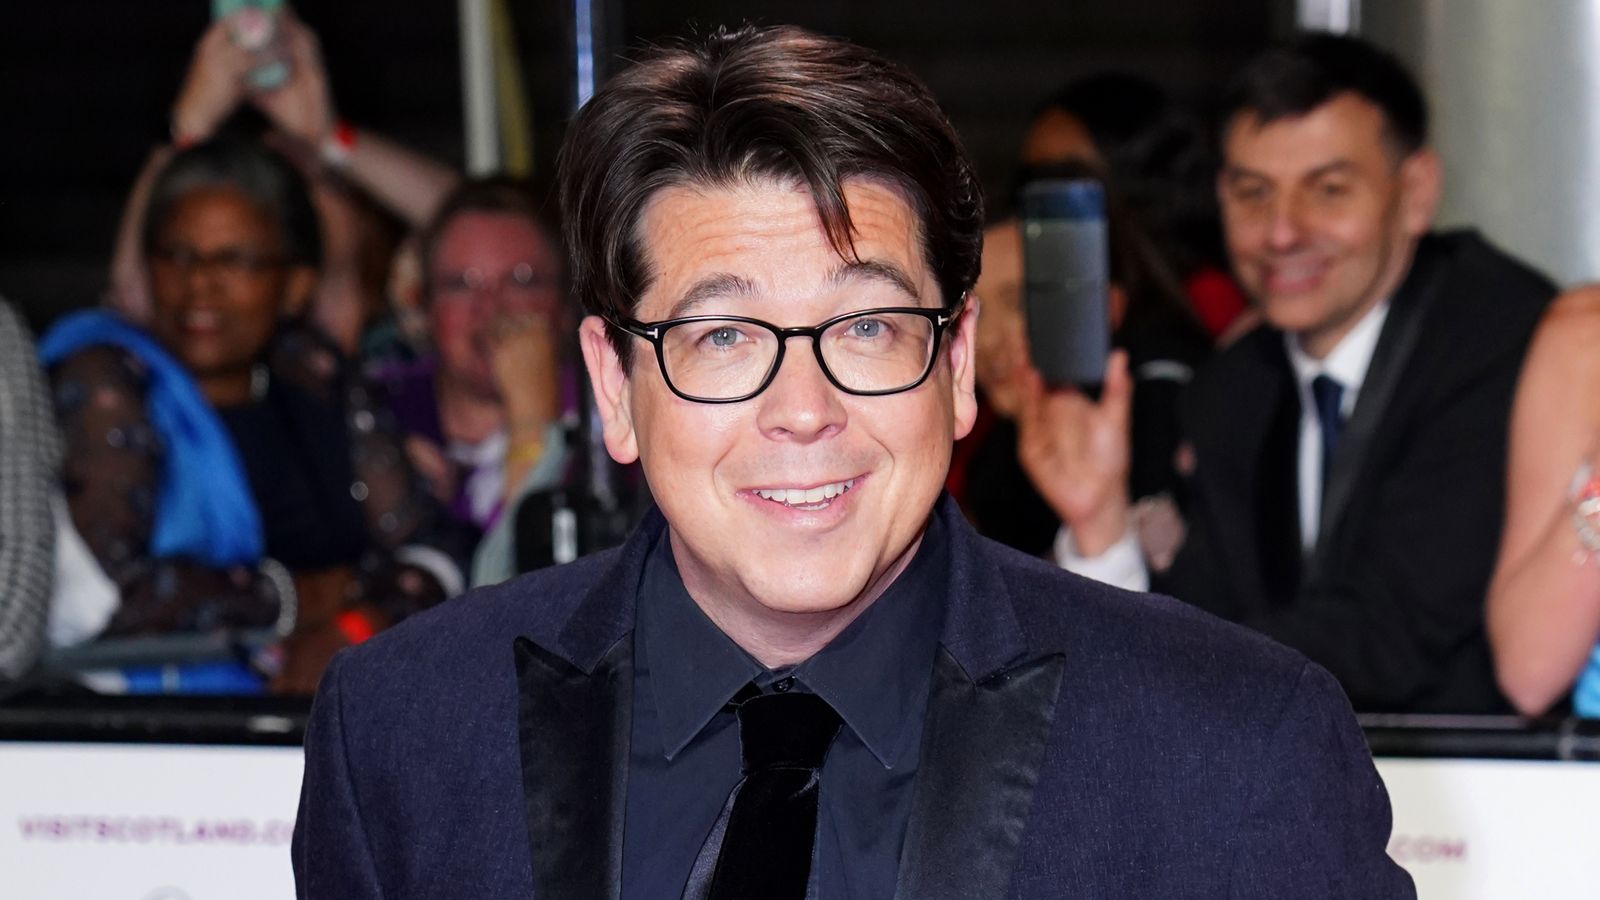 Michael McIntyre cancels gig after undergoing surgery